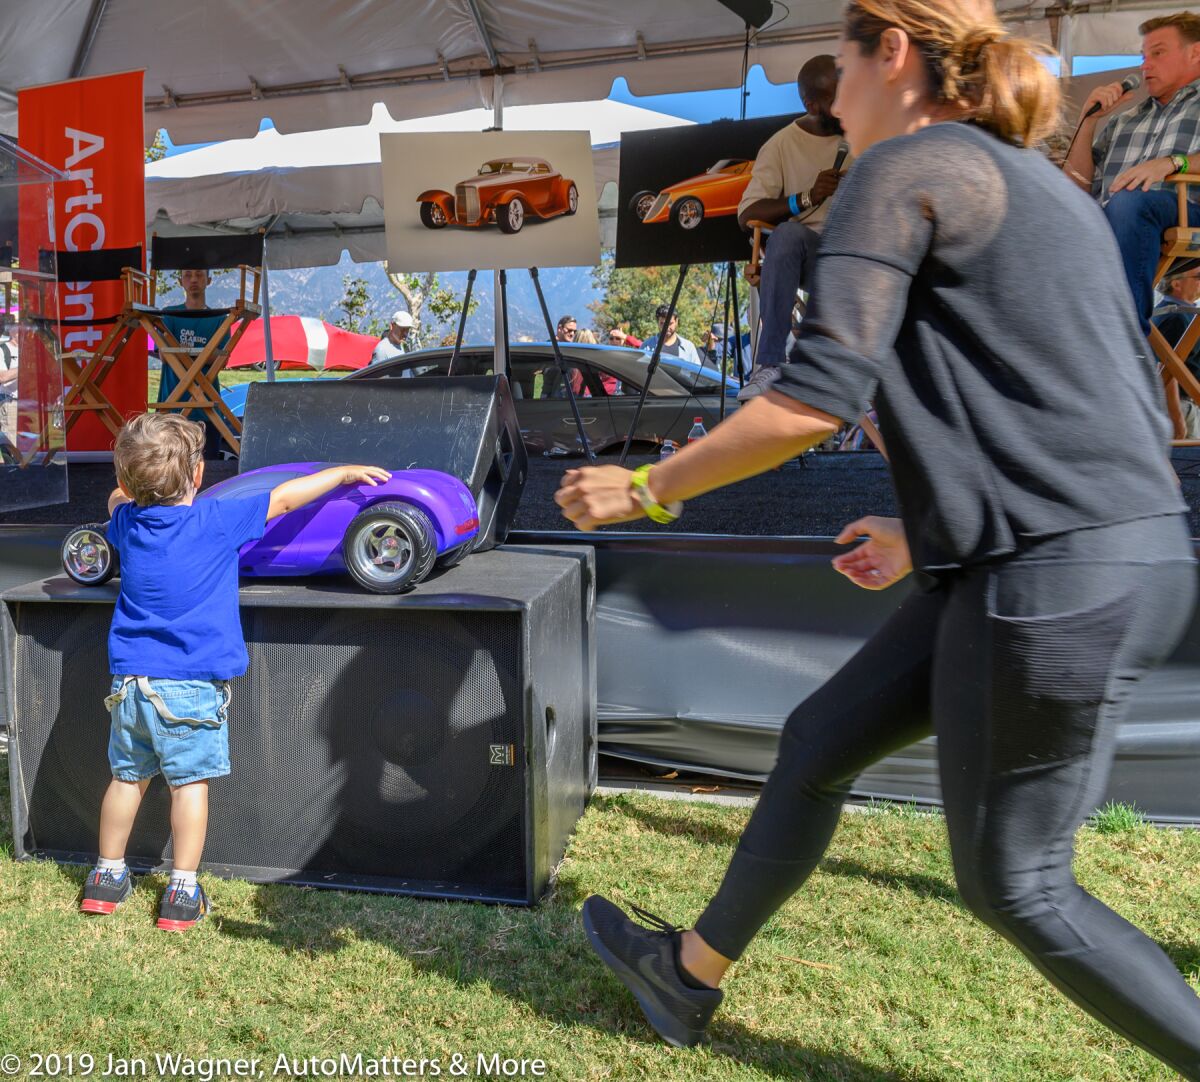 A future auto designer rushes the stage during Chip Foose’s Car Classic 2019 interview